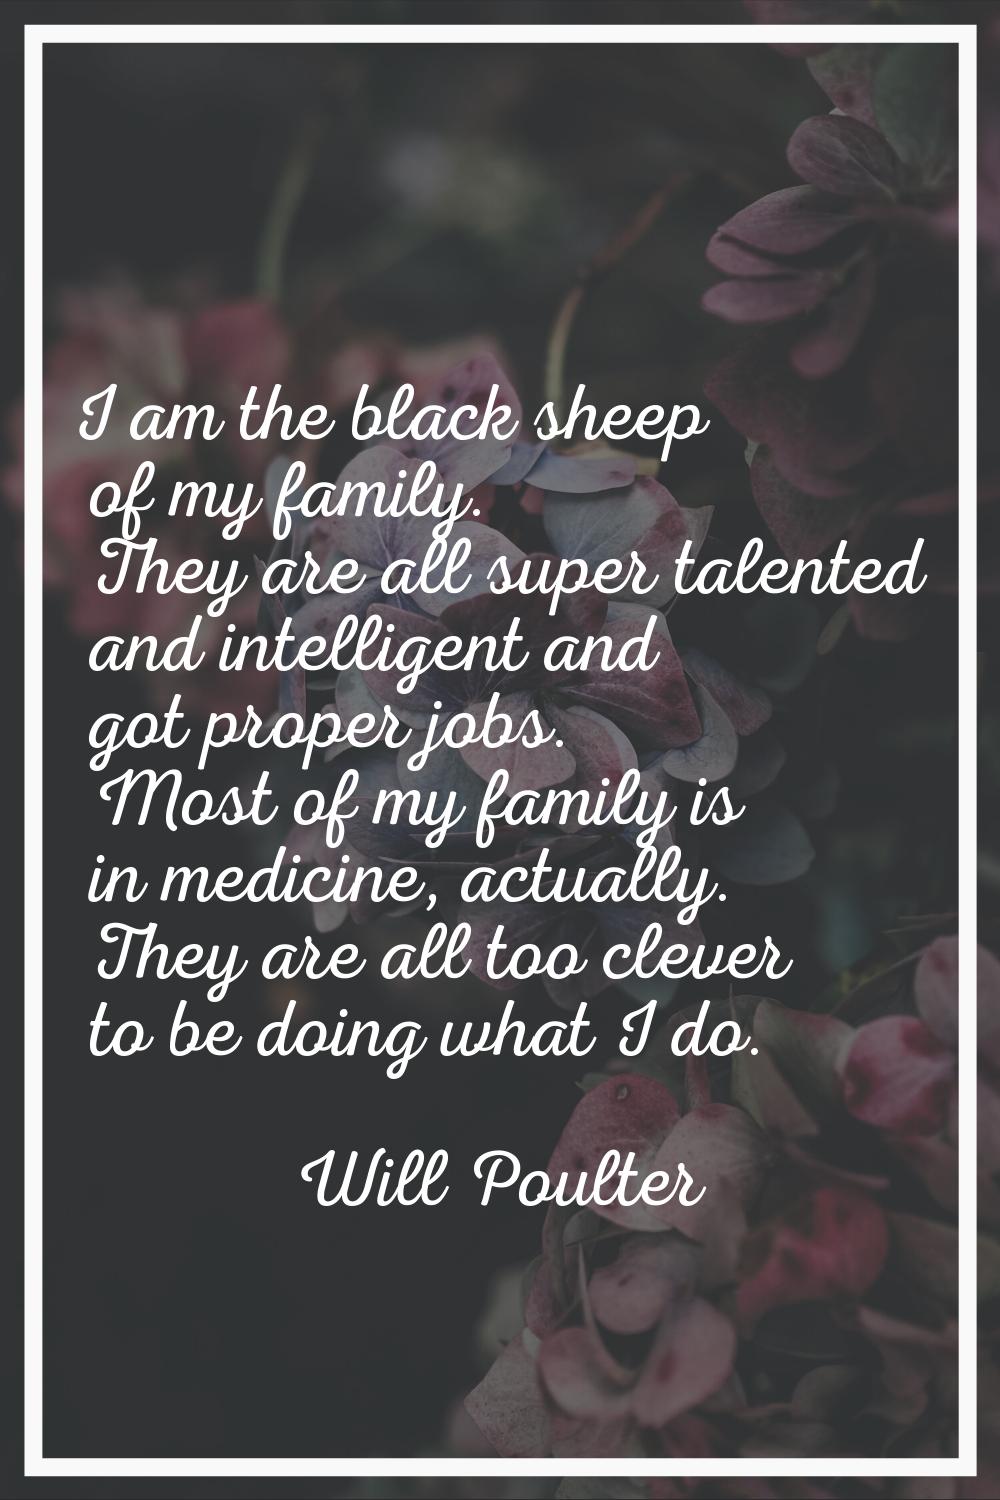 I am the black sheep of my family. They are all super talented and intelligent and got proper jobs.